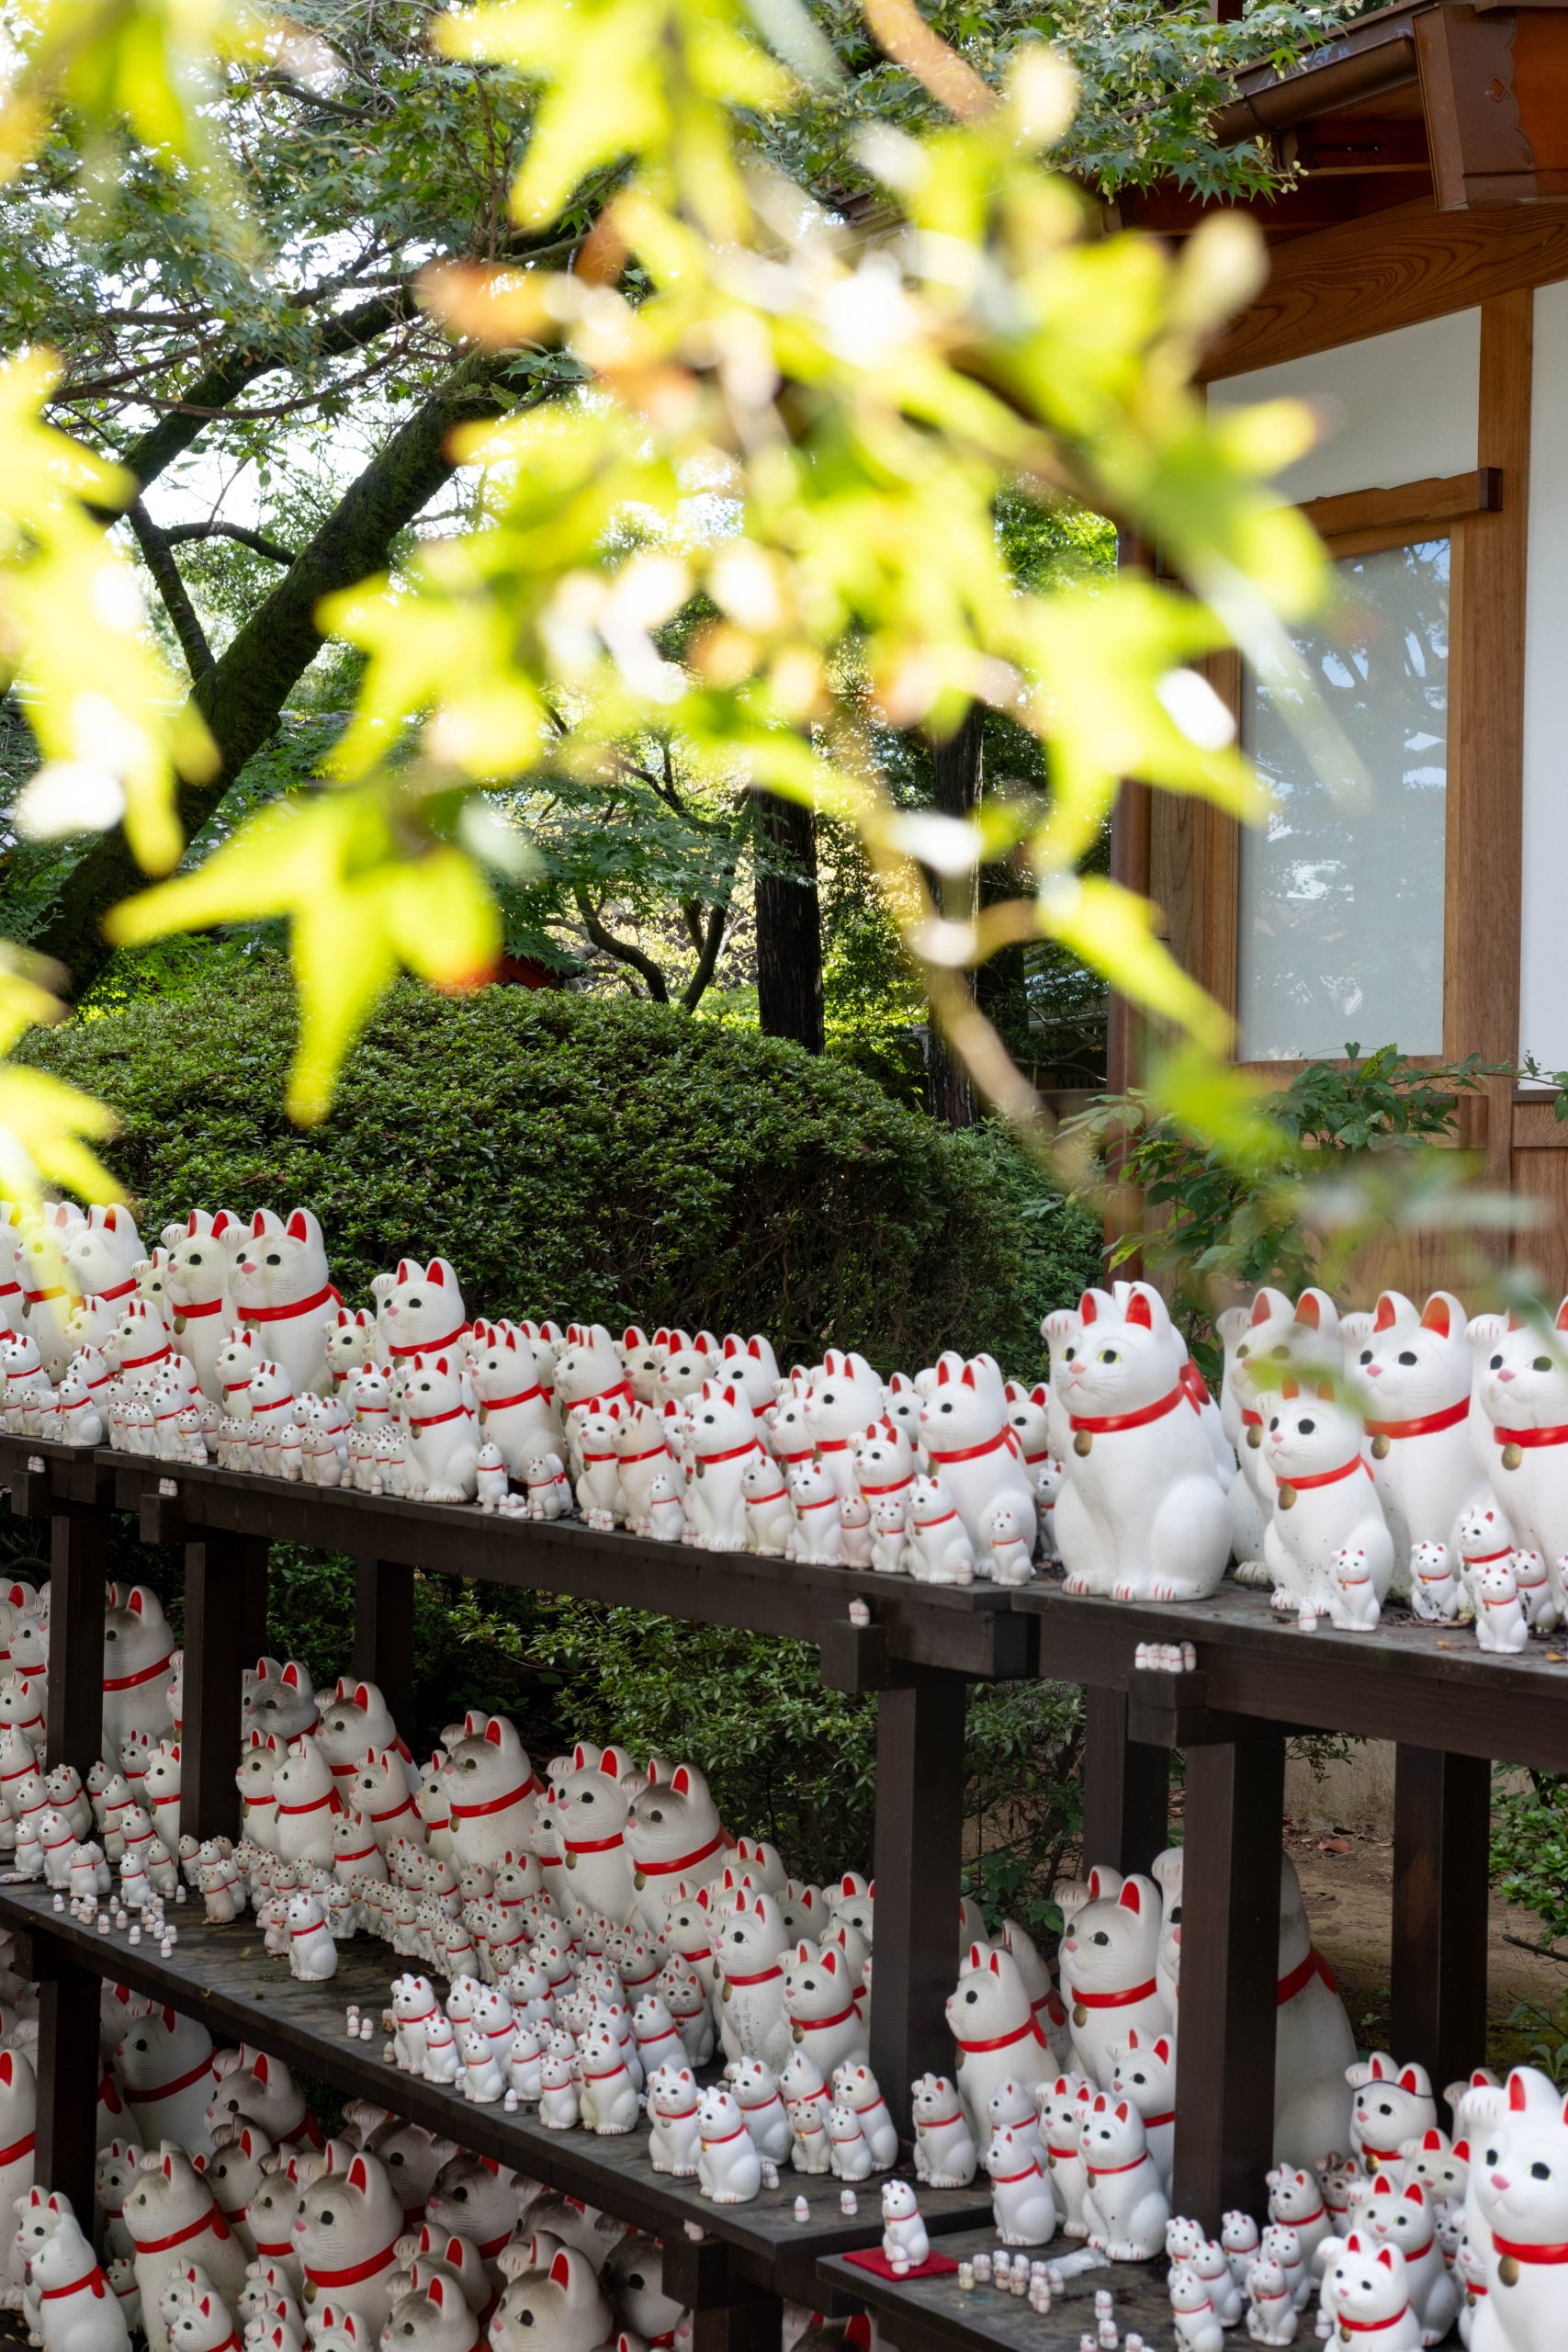 Lucky cat figurines at Gotokuji temple